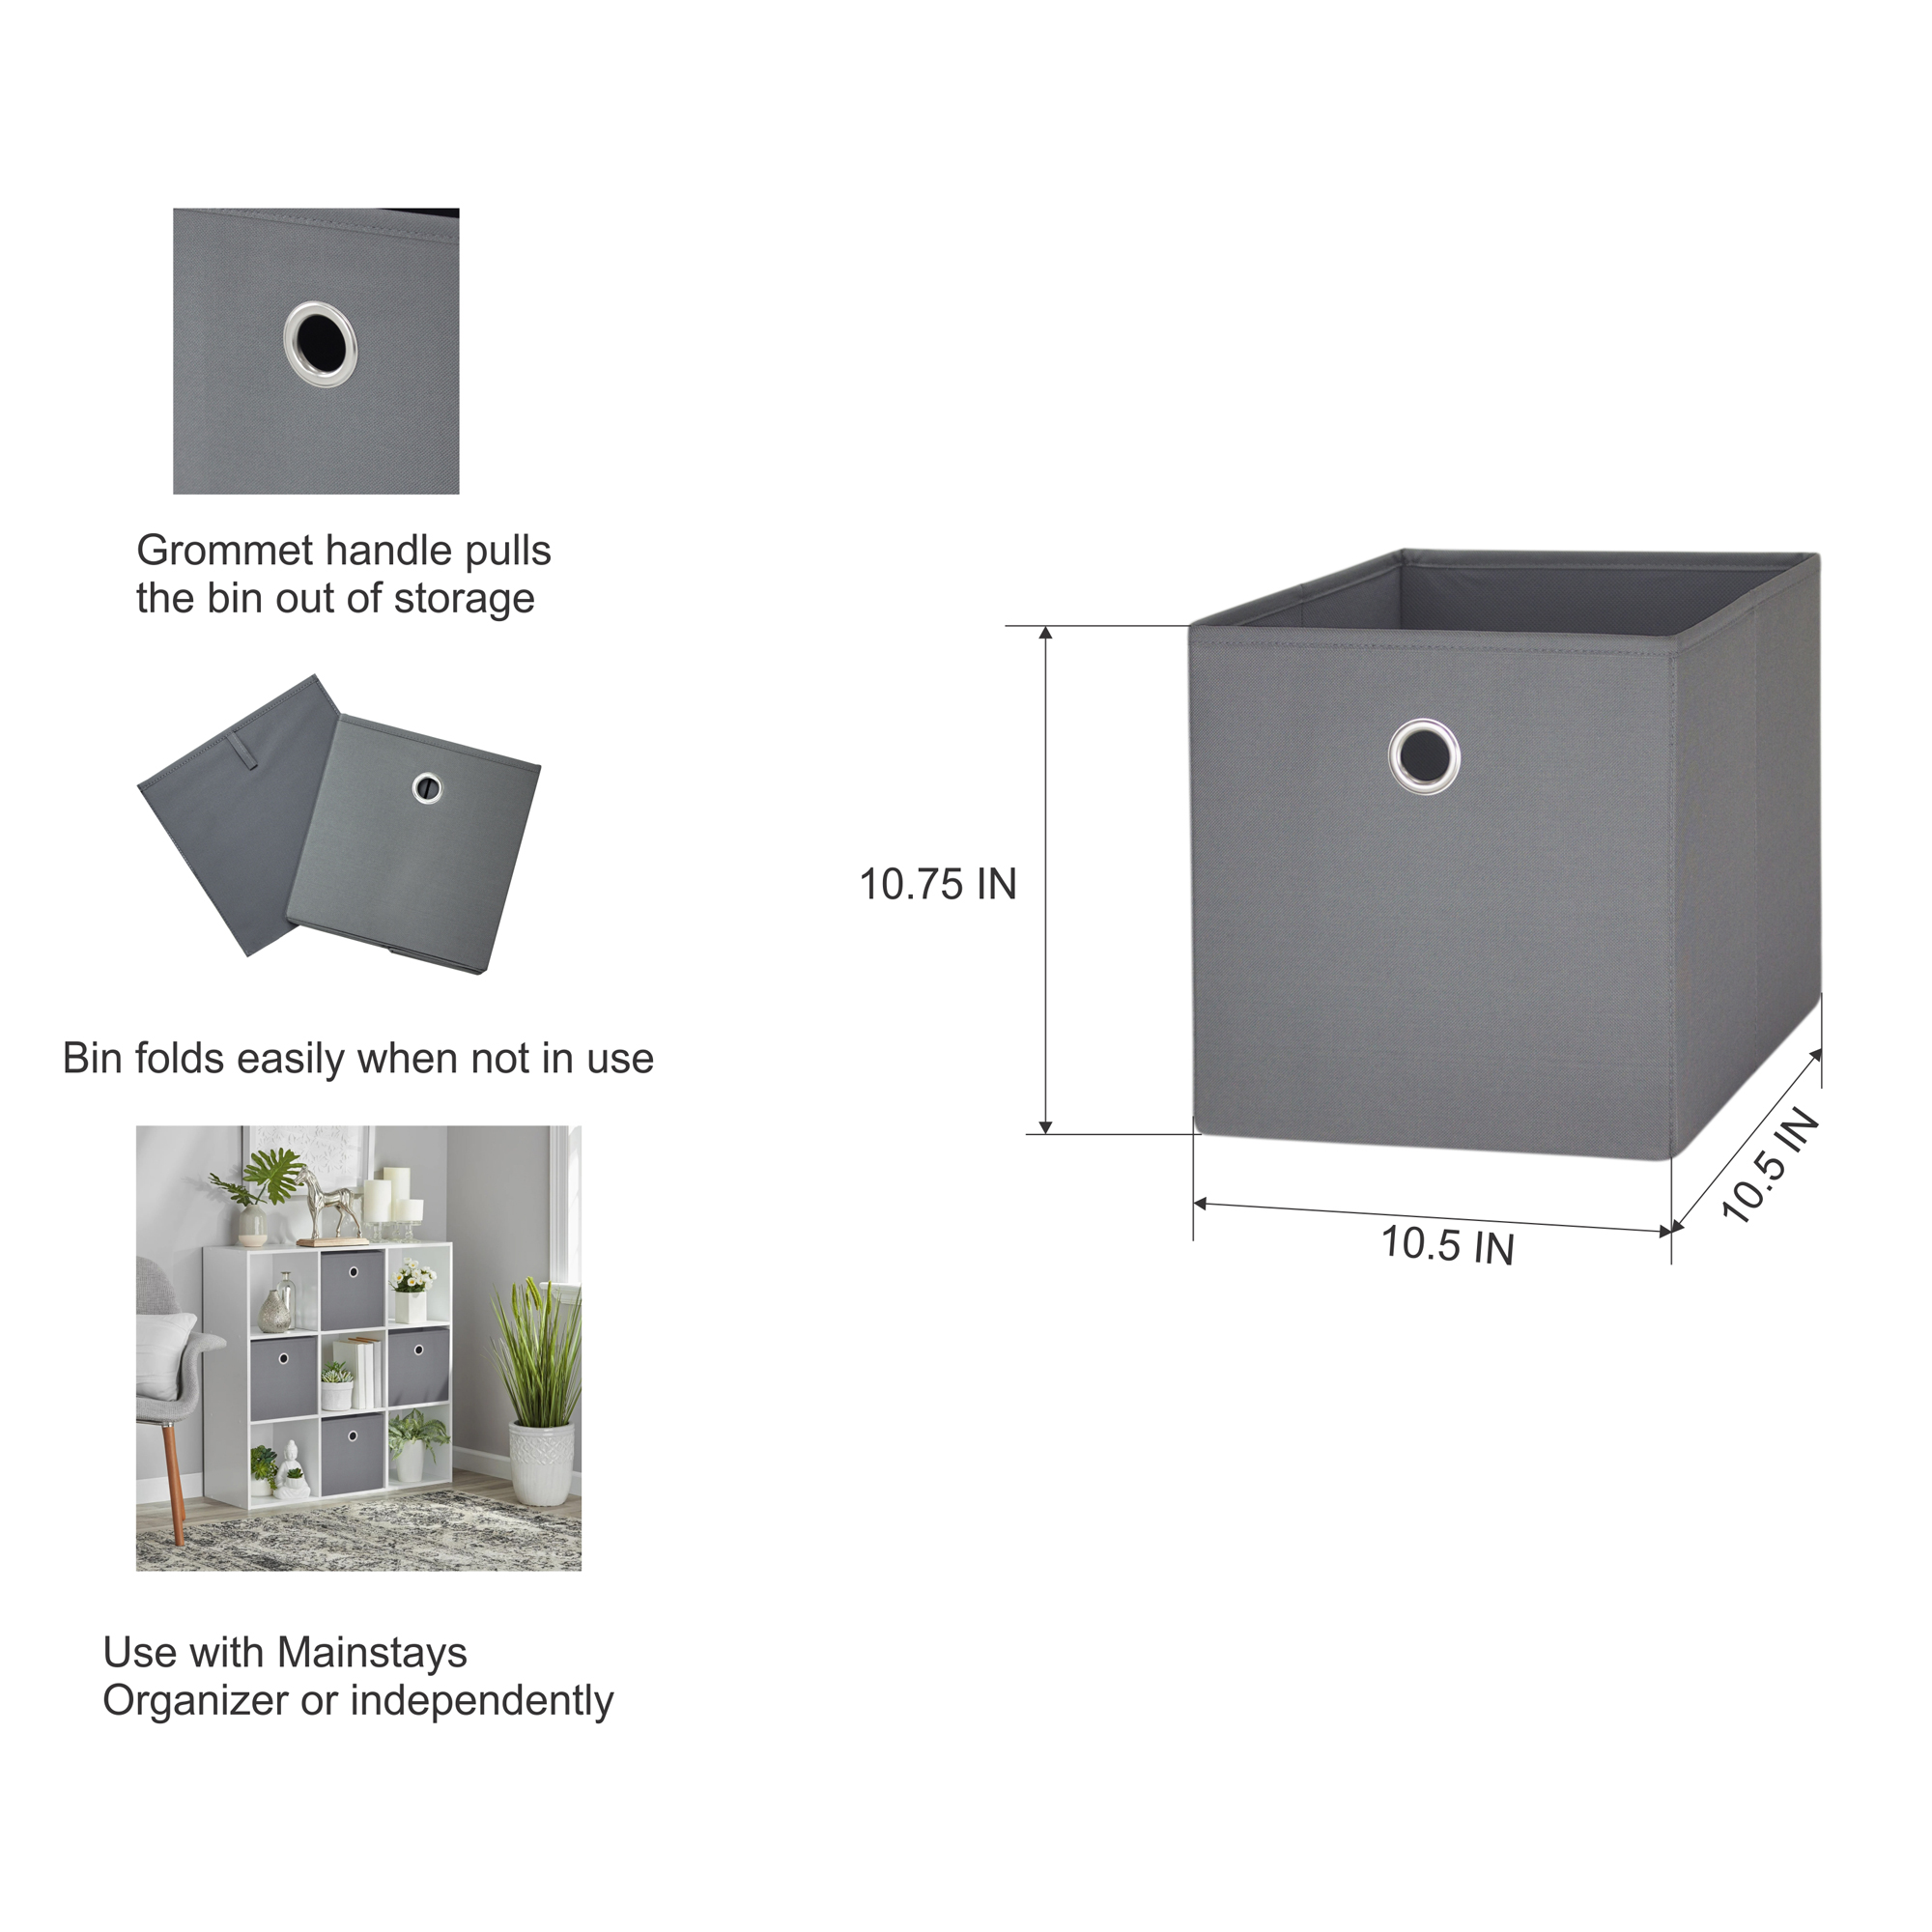 Mainstays Collapsible Fabric Cube Storage Bins (10.5" x 10.5"), 4 pack, Grey Flannel - image 3 of 6